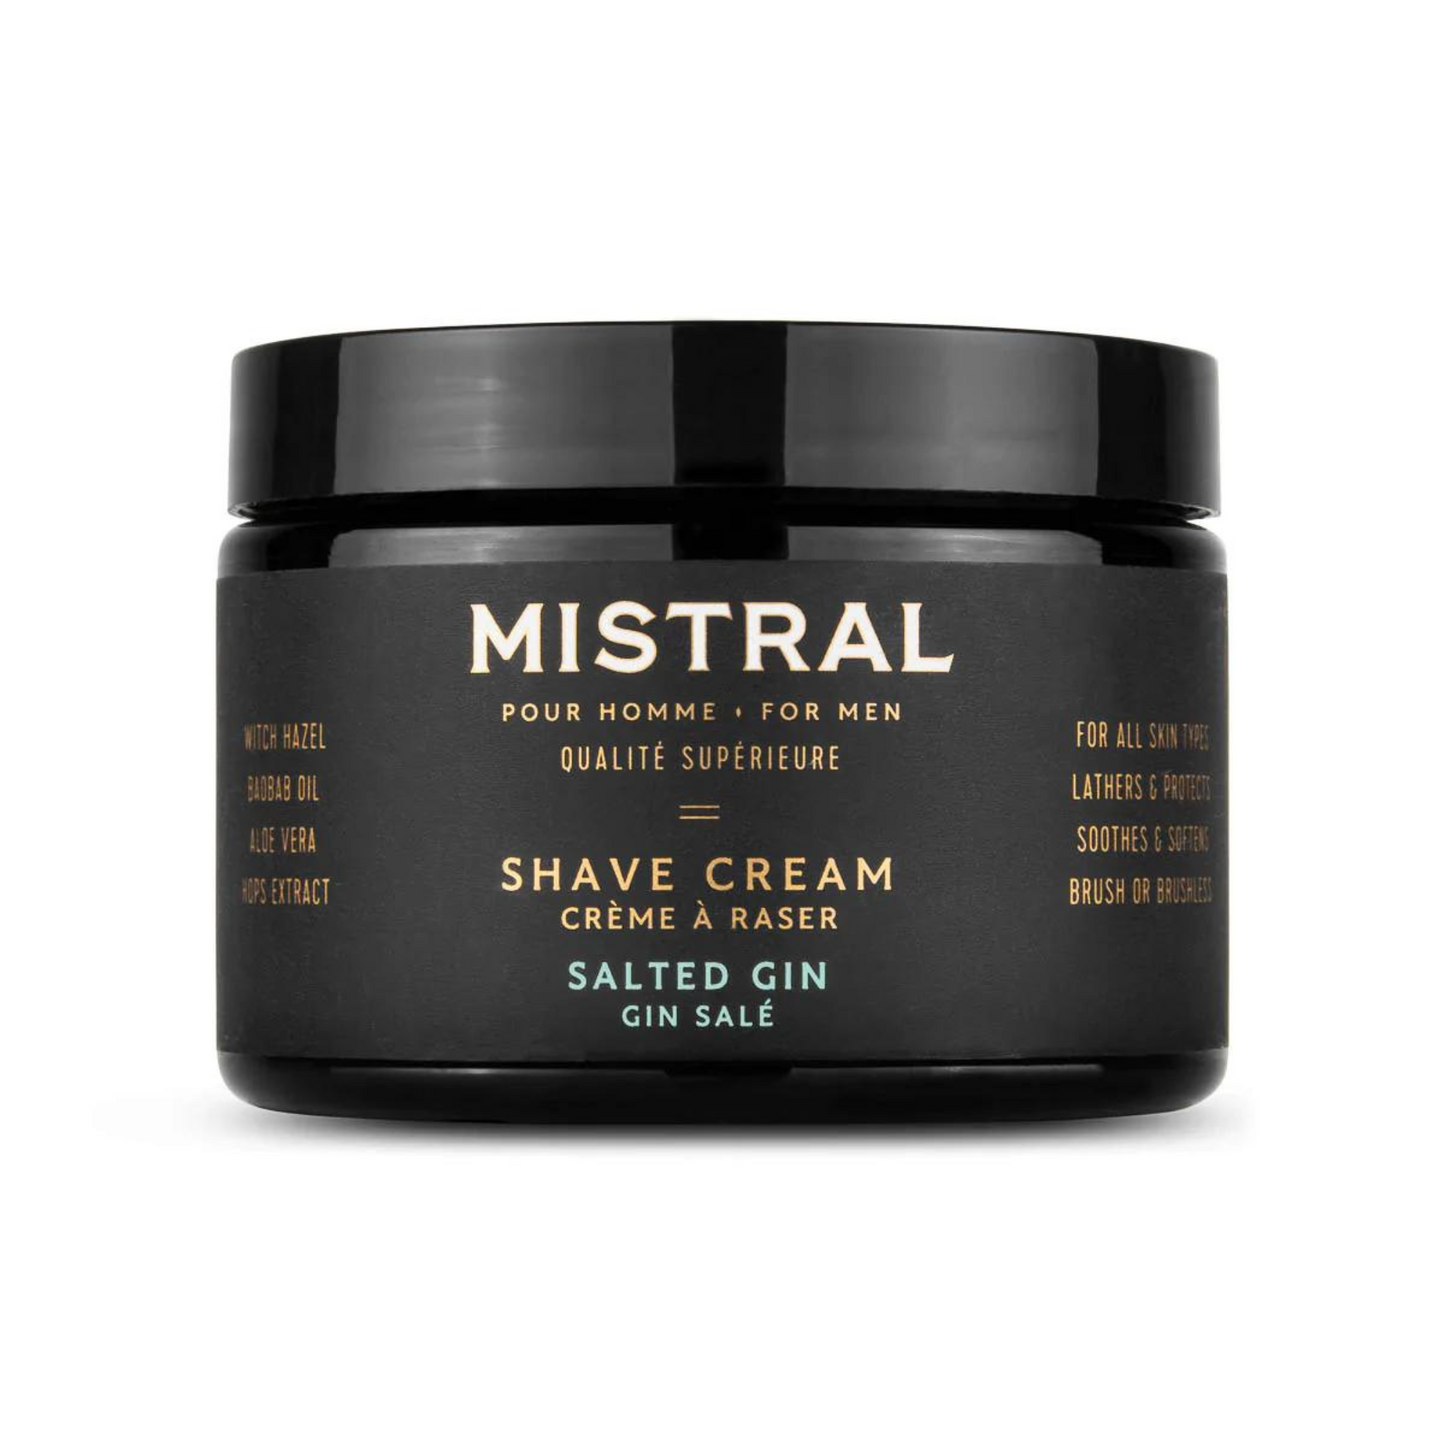 Primary Image of Mistral Salted Gin Shave Cream (9 oz)